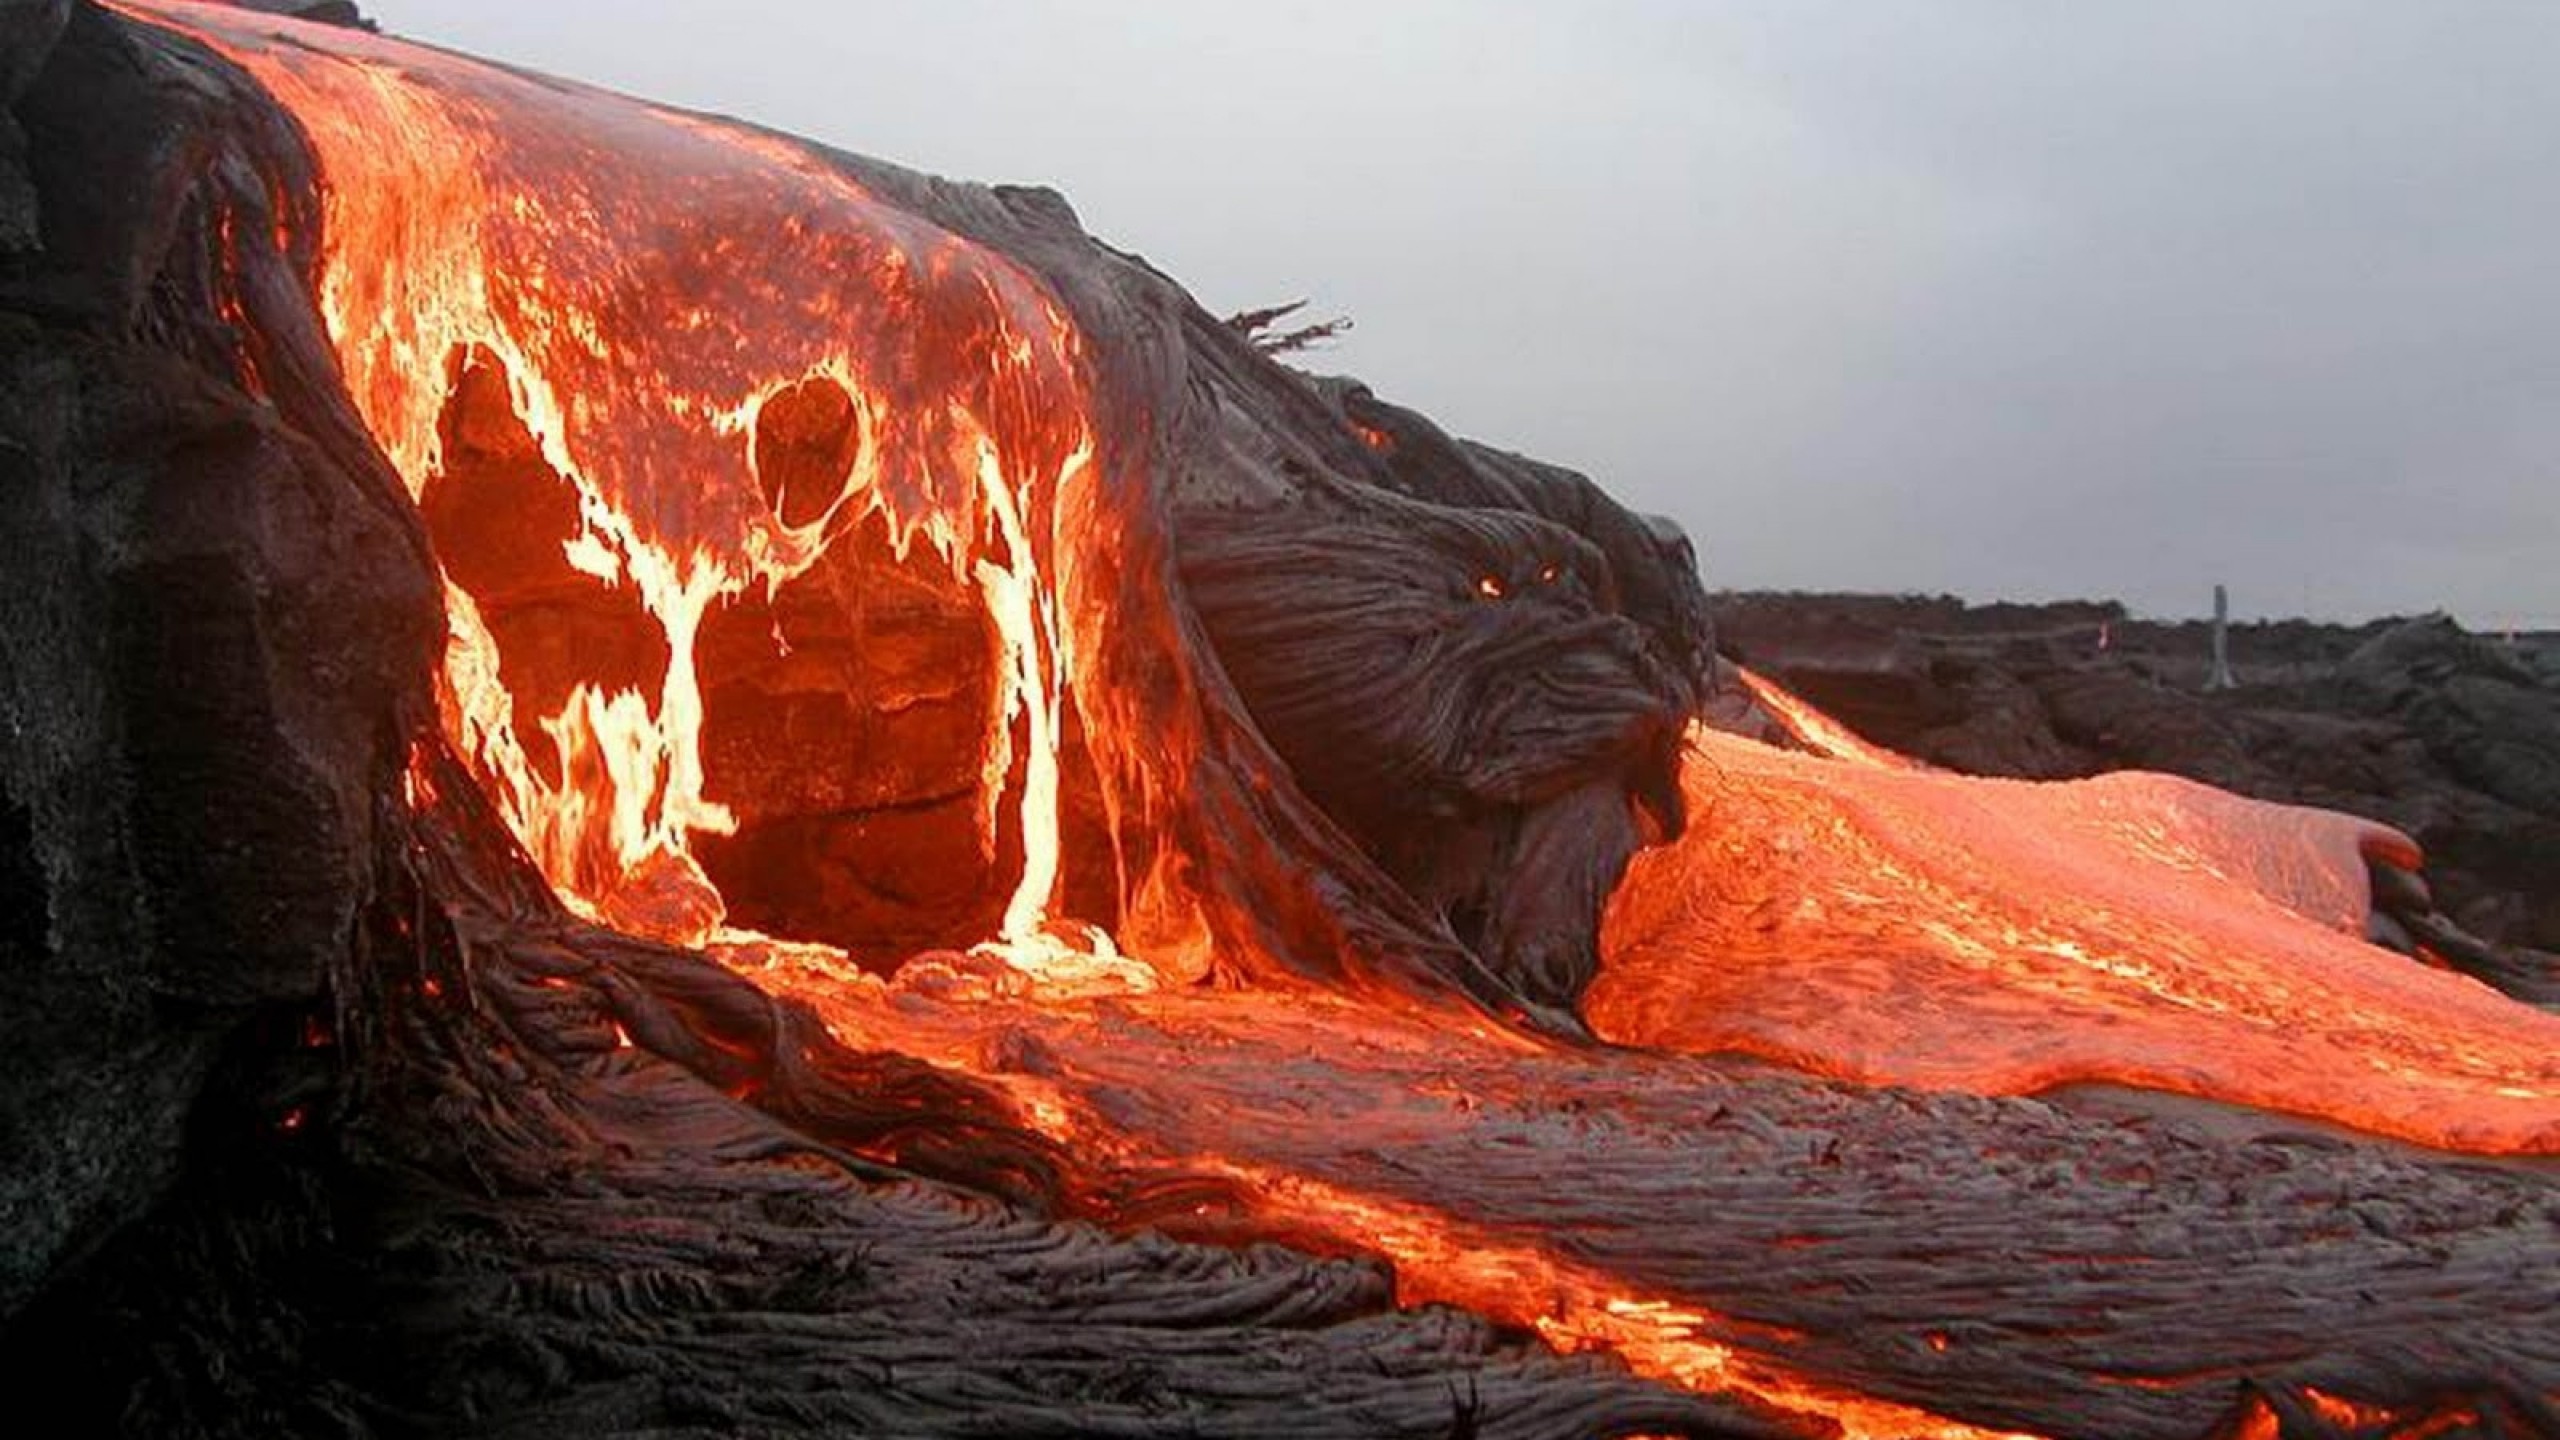 https://www.reddit.com/r/lavaporn/comments/29zo27/flowing_lava_in_hawaii_unknown_photographer/